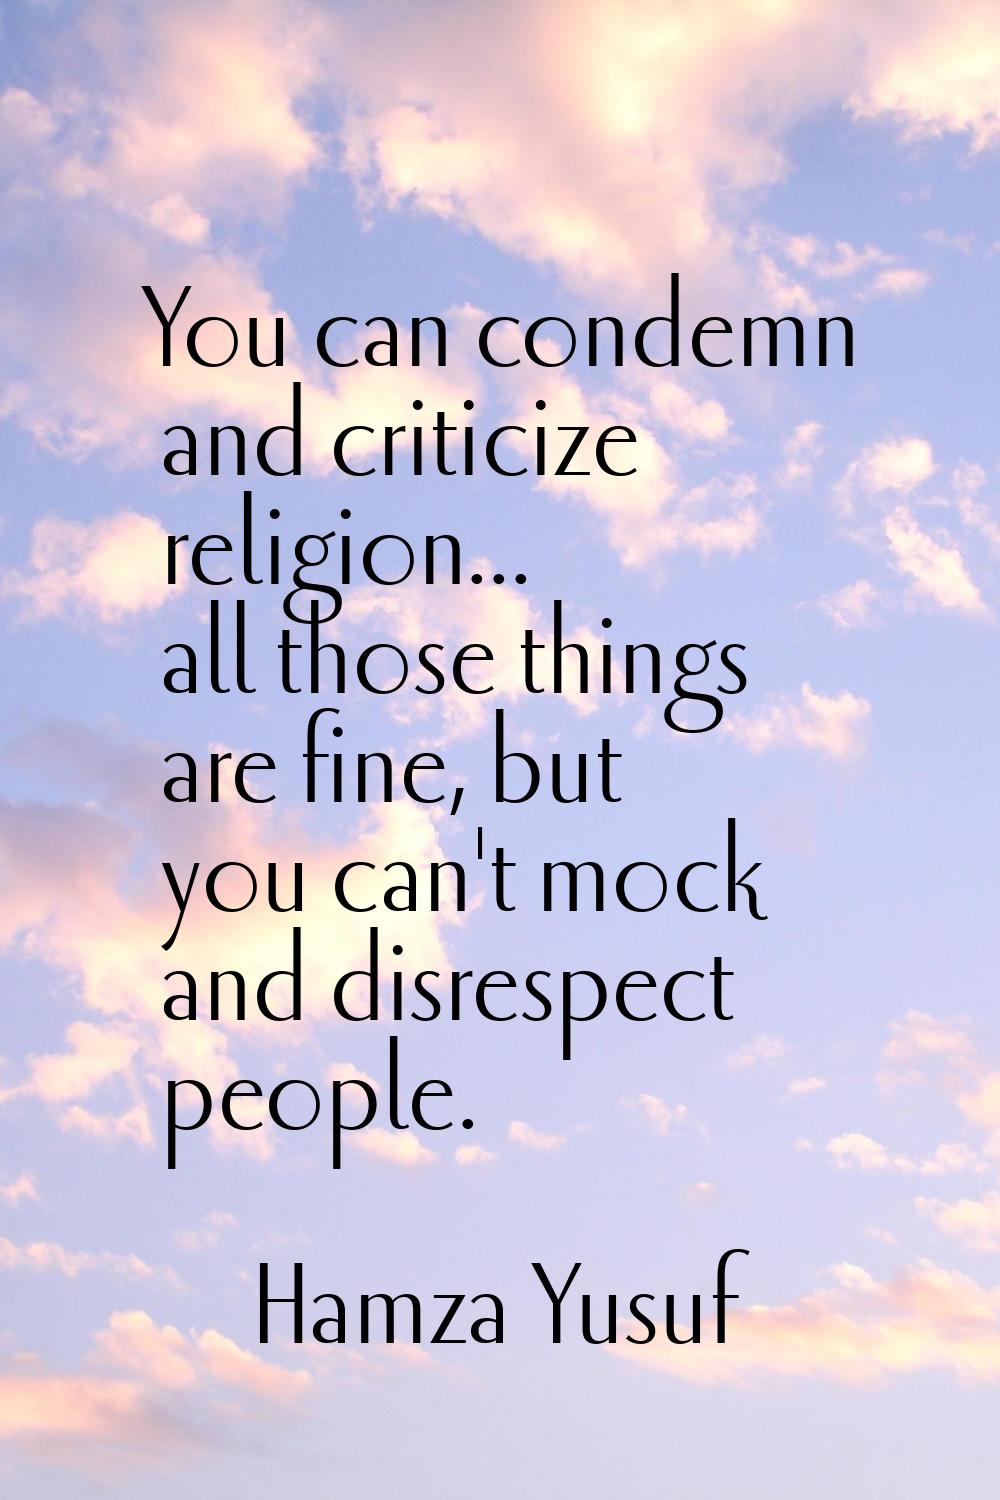 You can condemn and criticize religion... all those things are fine, but you can't mock and disresp